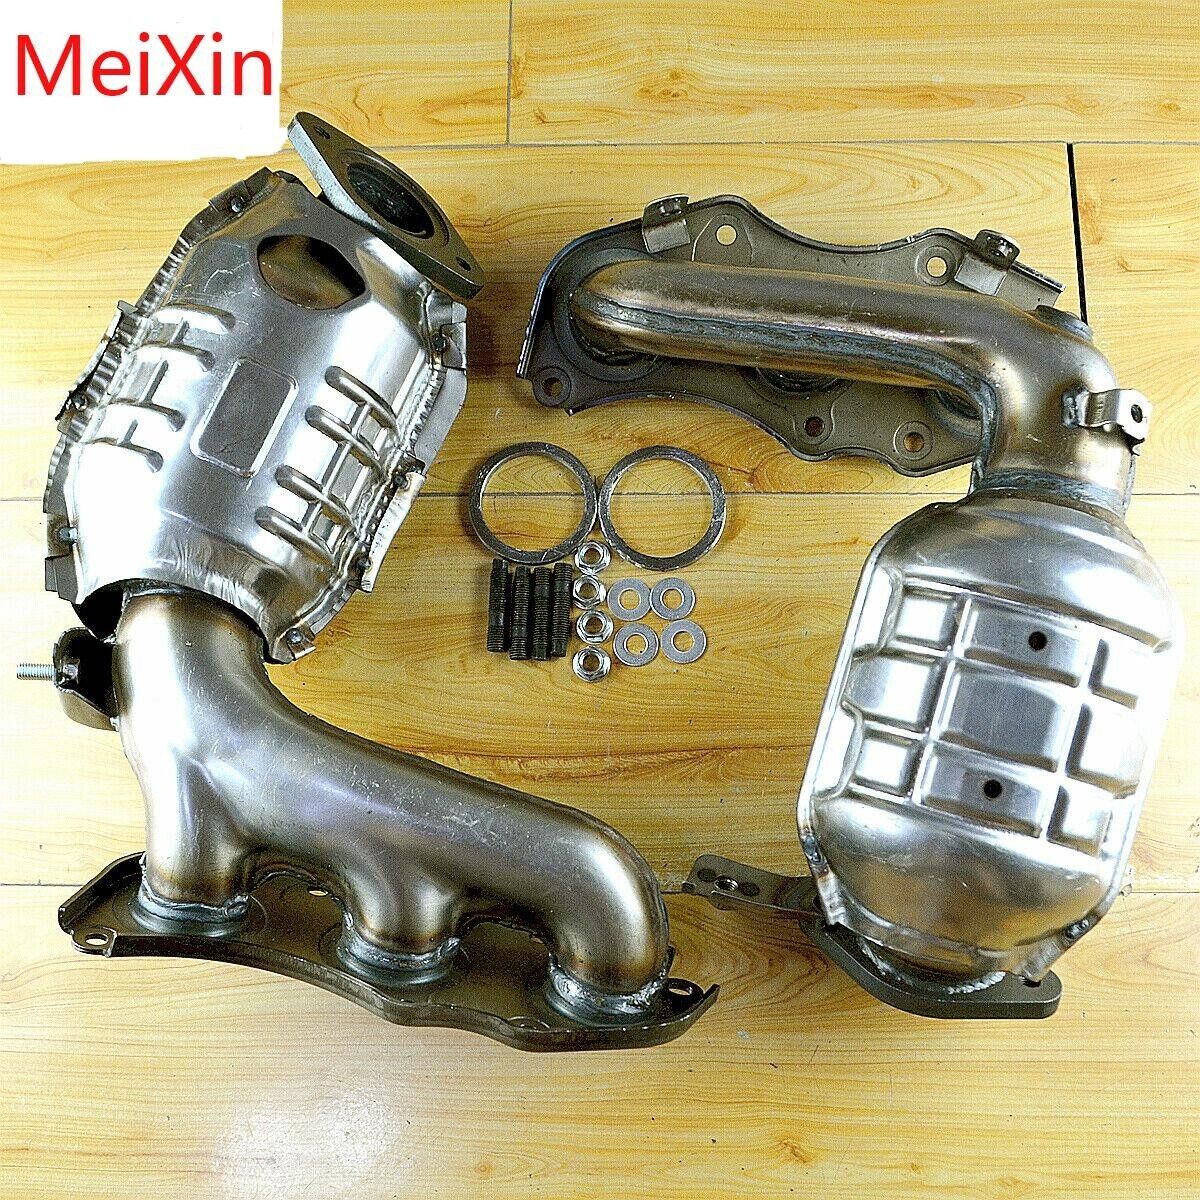 For USA Toyota Sienna 3.5L Both Manifold Catalytic Converters 2011- 15 FWD ONLY